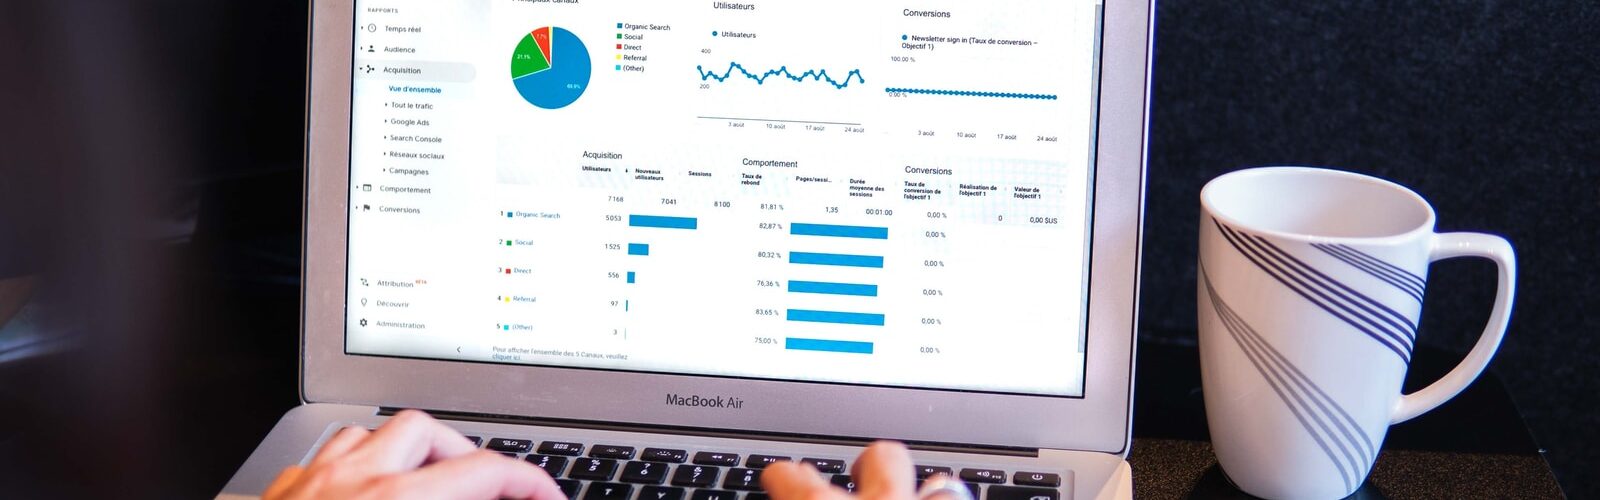 Gaining Insight Through Monitoring The Analytics of Your Campaigns on Social Media Platforms